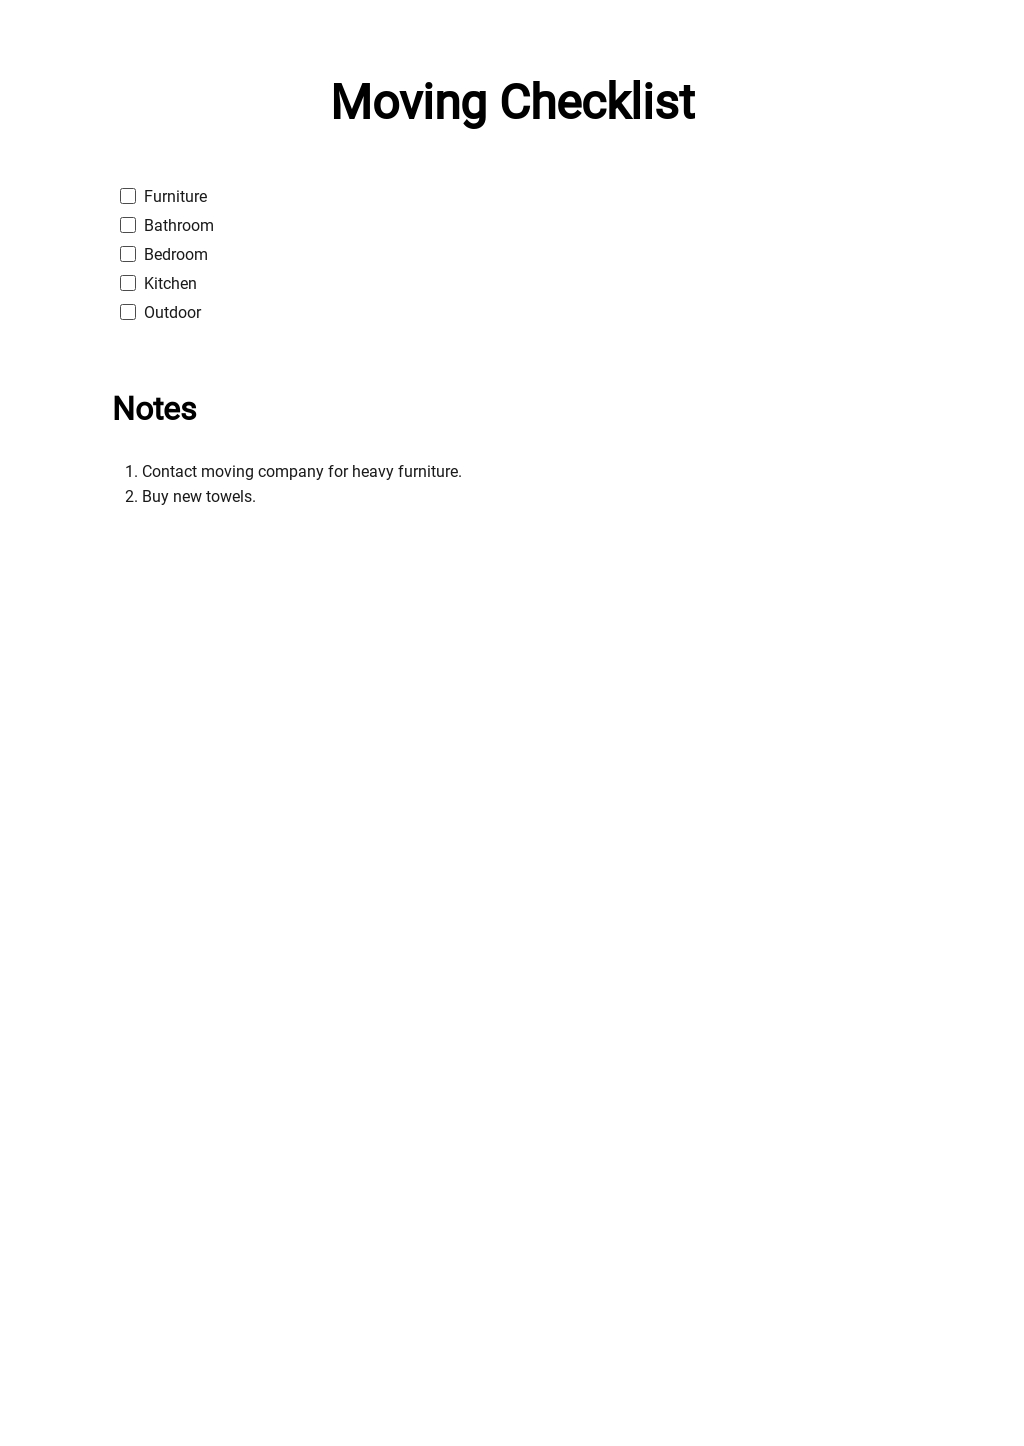 Free Moving Checklist Template.jpe